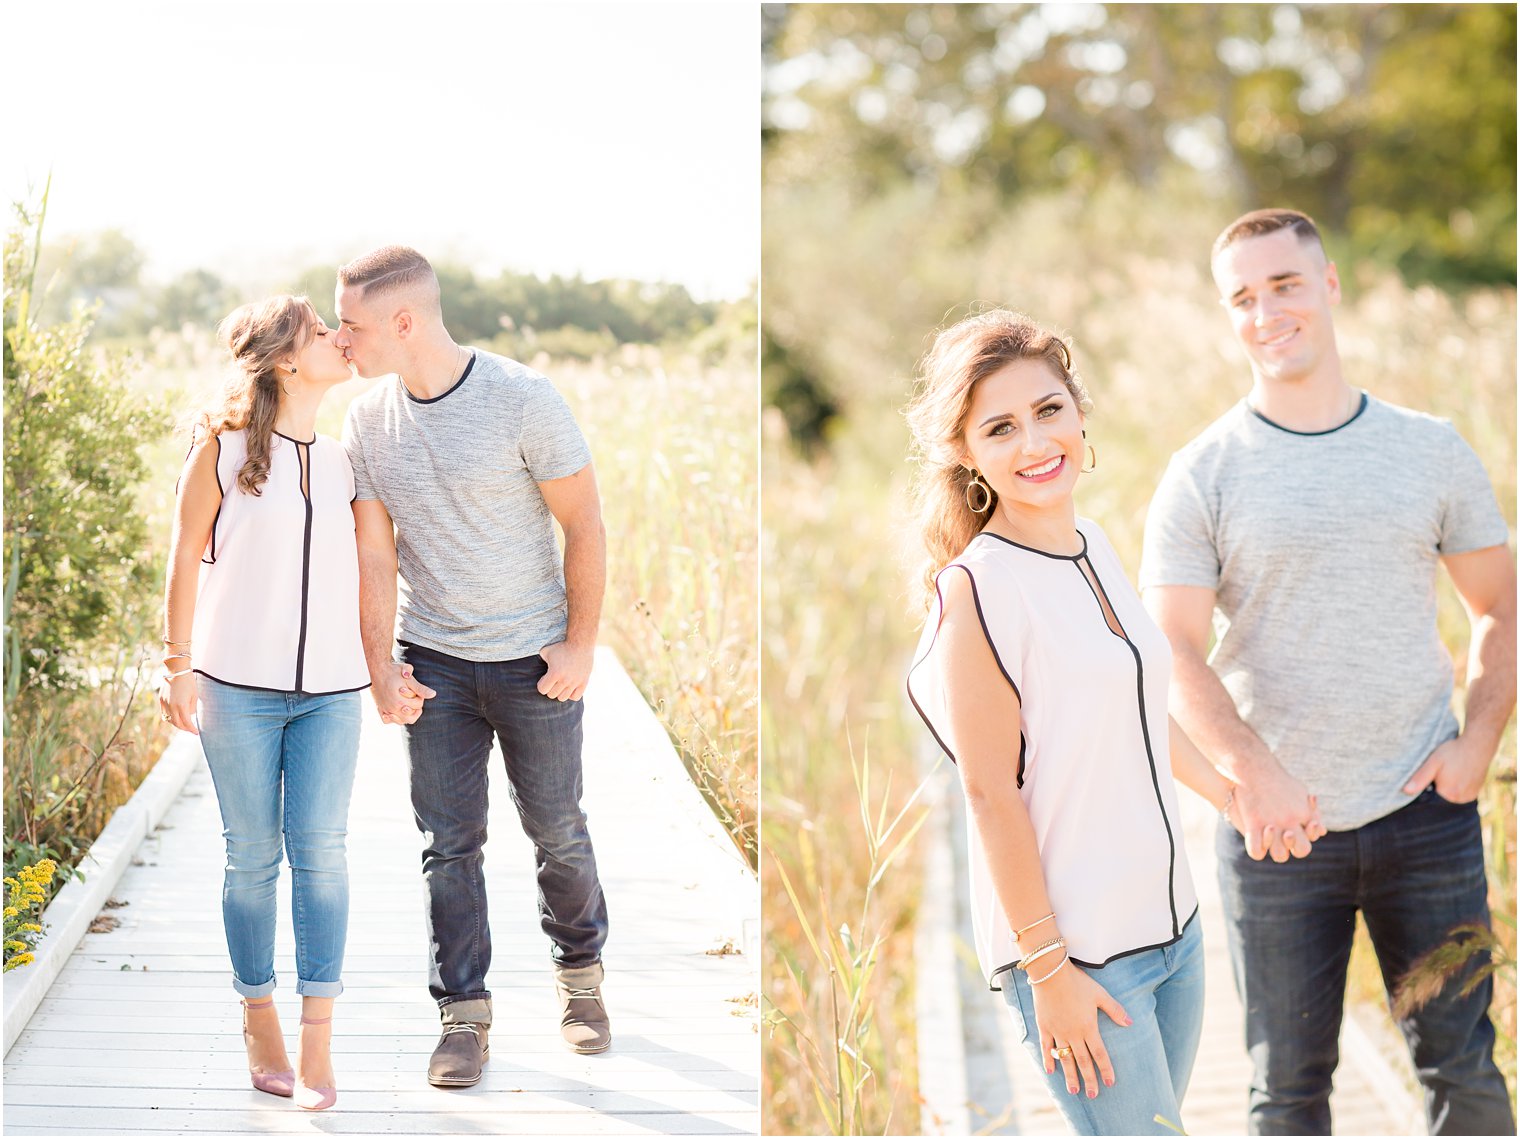 Happy couple at engagement session | Photos by Idalia Photography